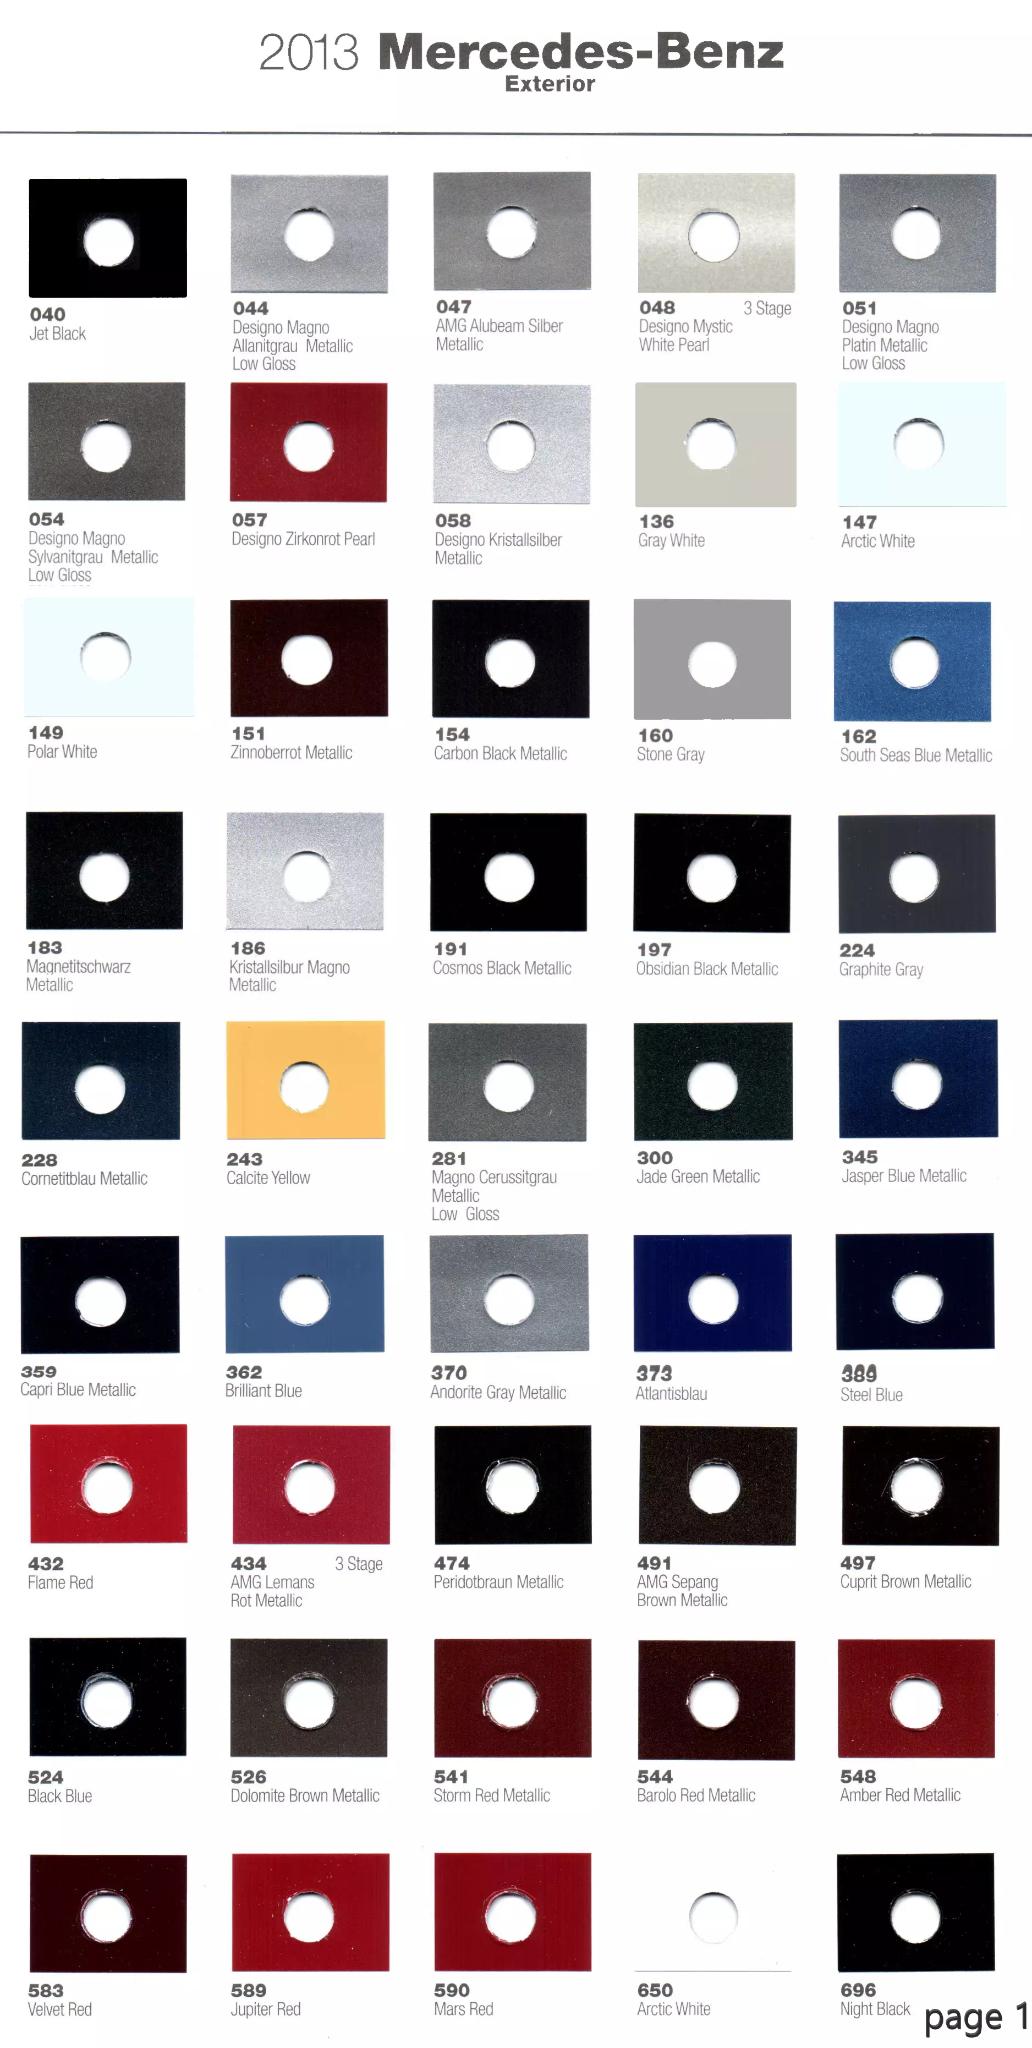 Exterior Paint swatches, color names and Color codes used on Mercedes-benz in 2013